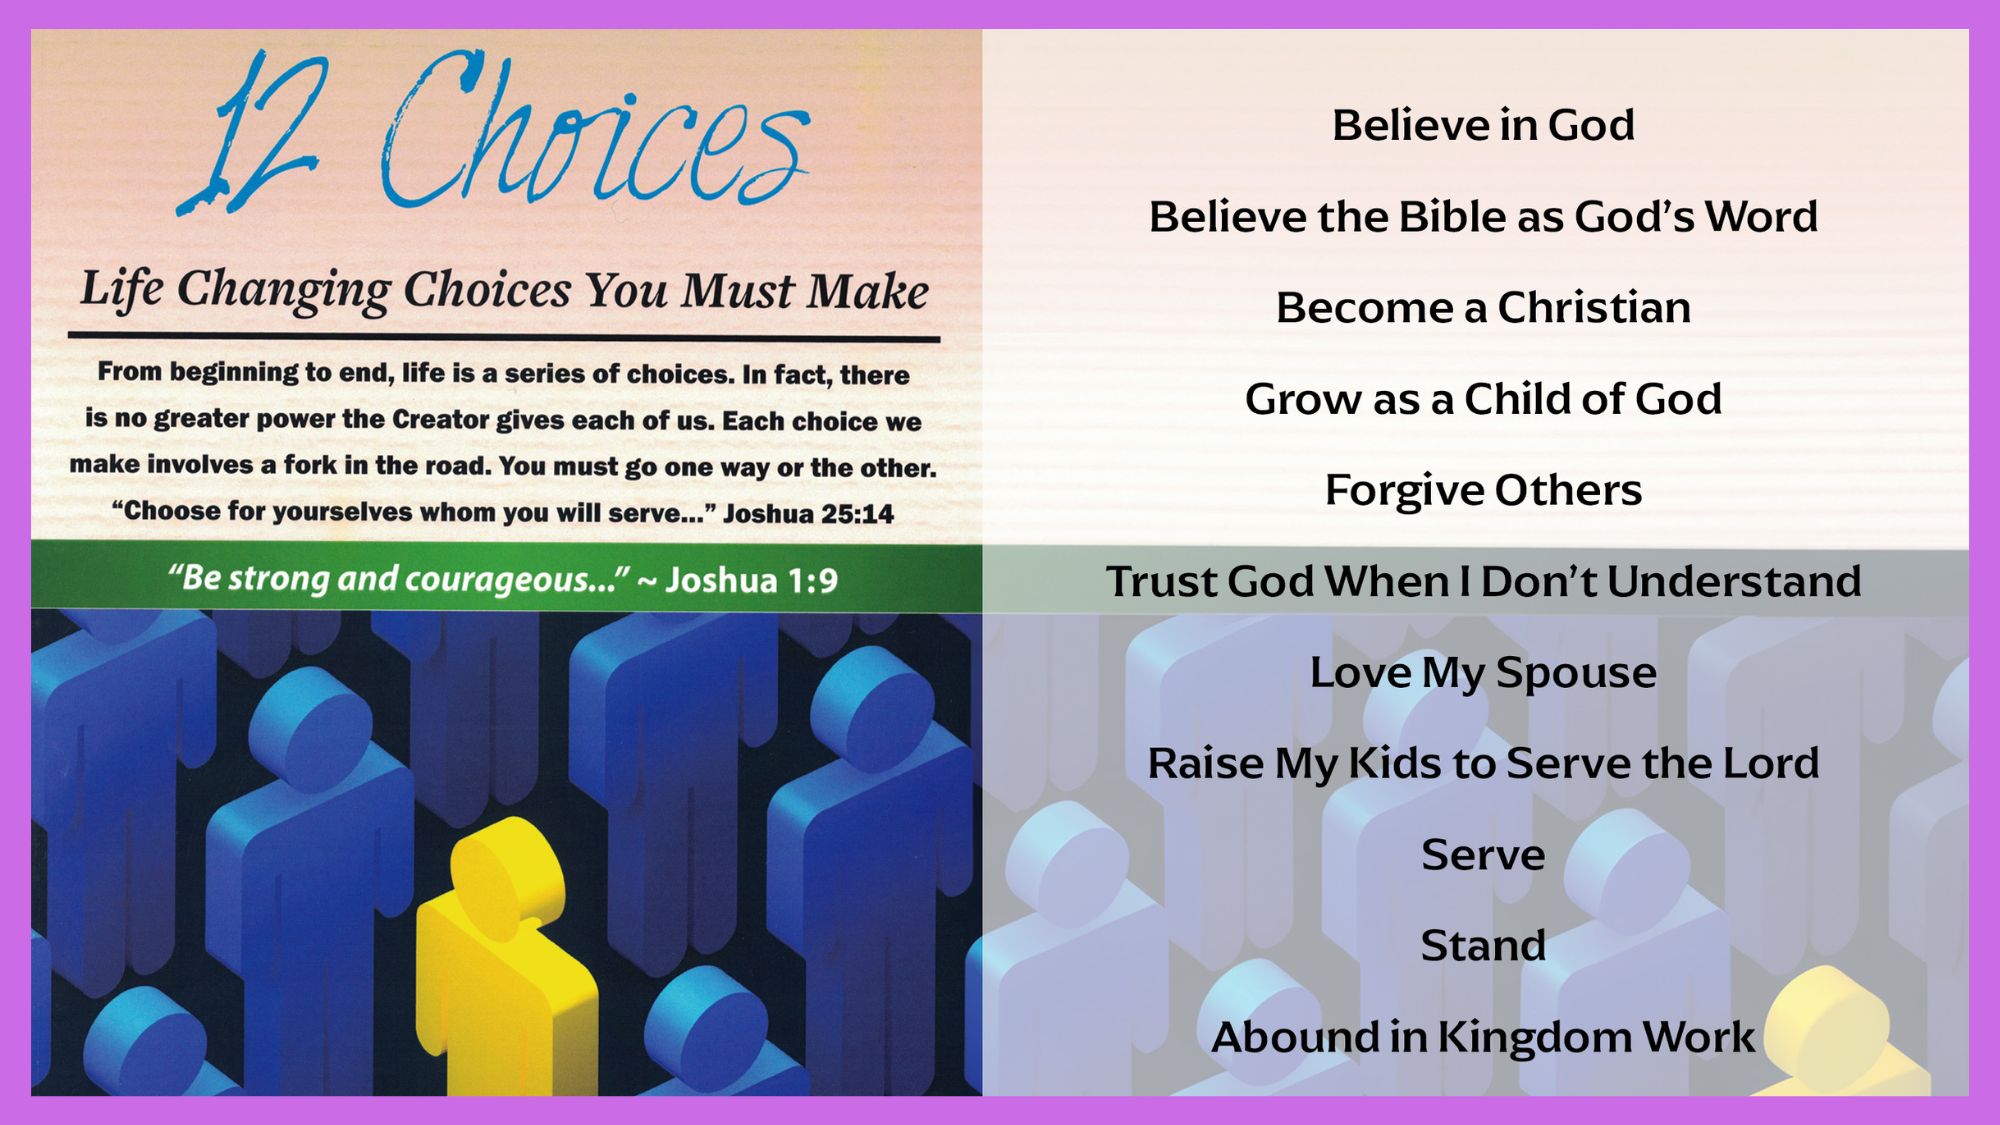 12 Choices - Life Changing Choices You Must Make  Choice # 2 Believe the Bible as God's Word